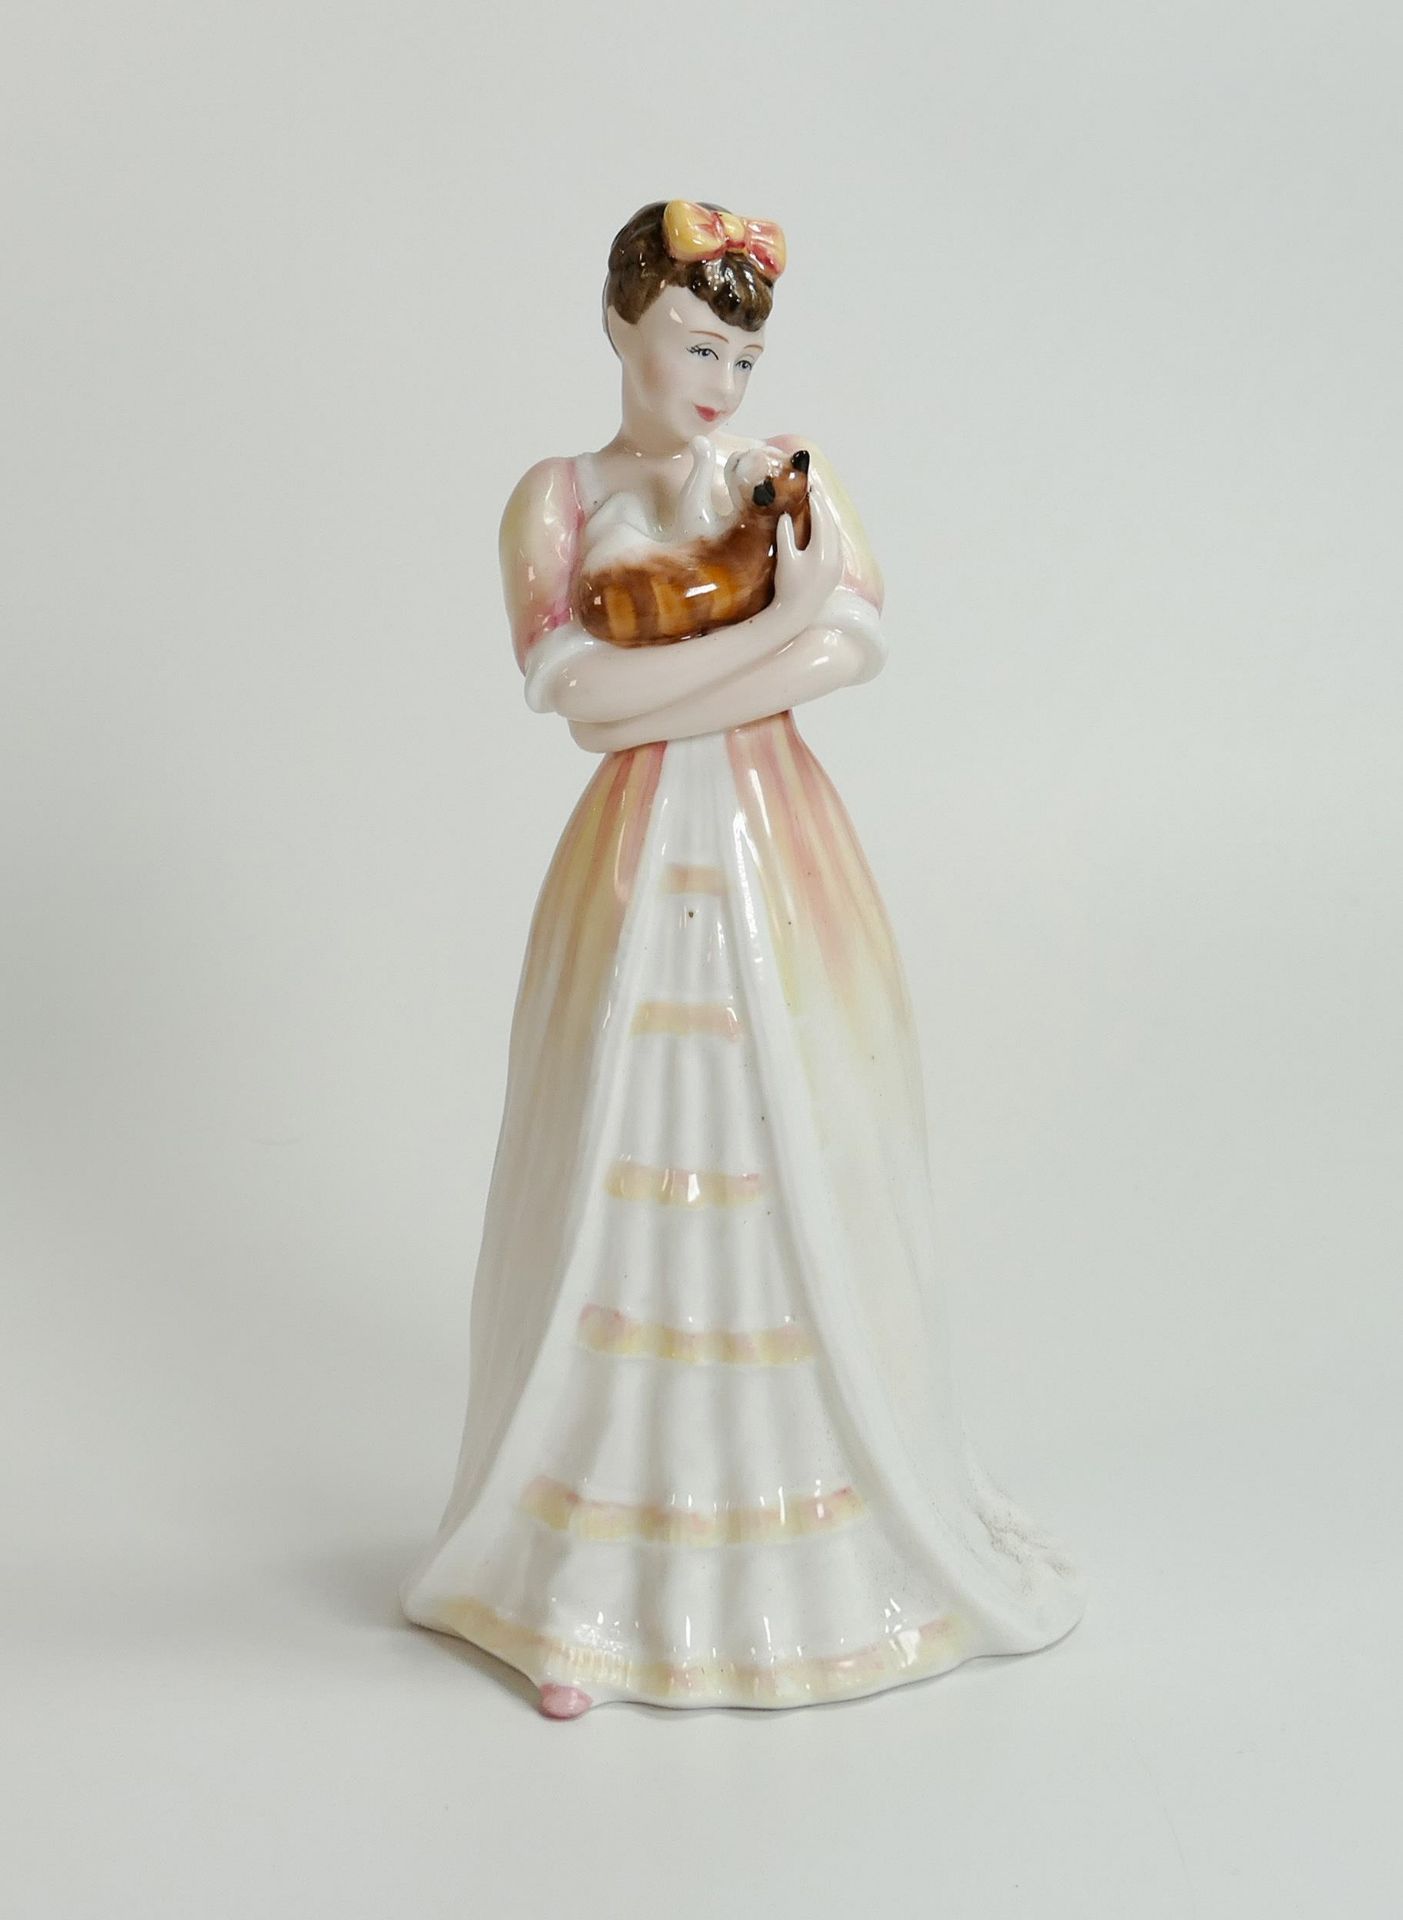 Royal Doulton Limited edition figure Kimberley HN3864 , signed to base